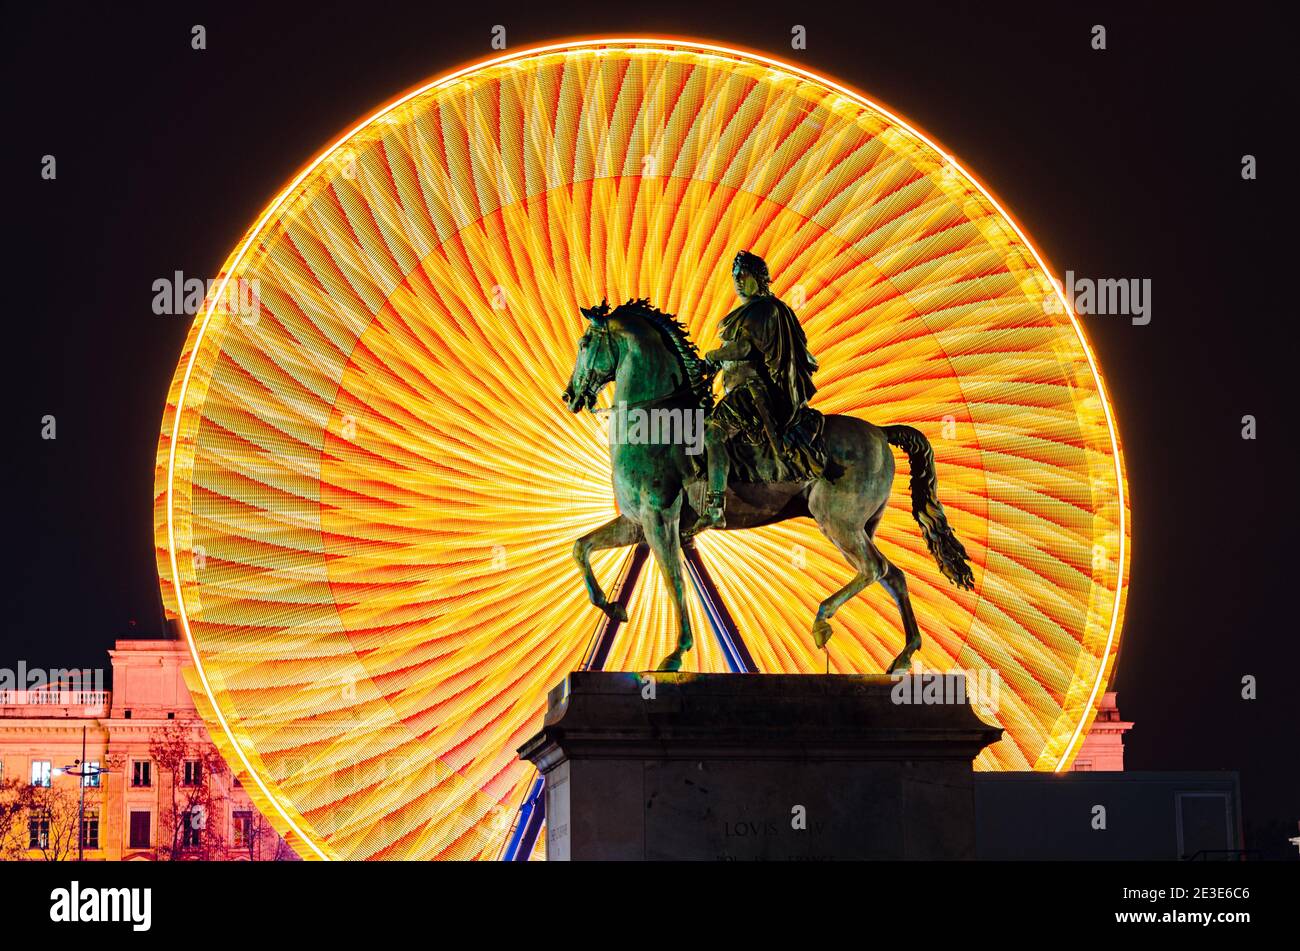 Ferris wheel in Place Bellecour at night, Lyon, France Stock Photo